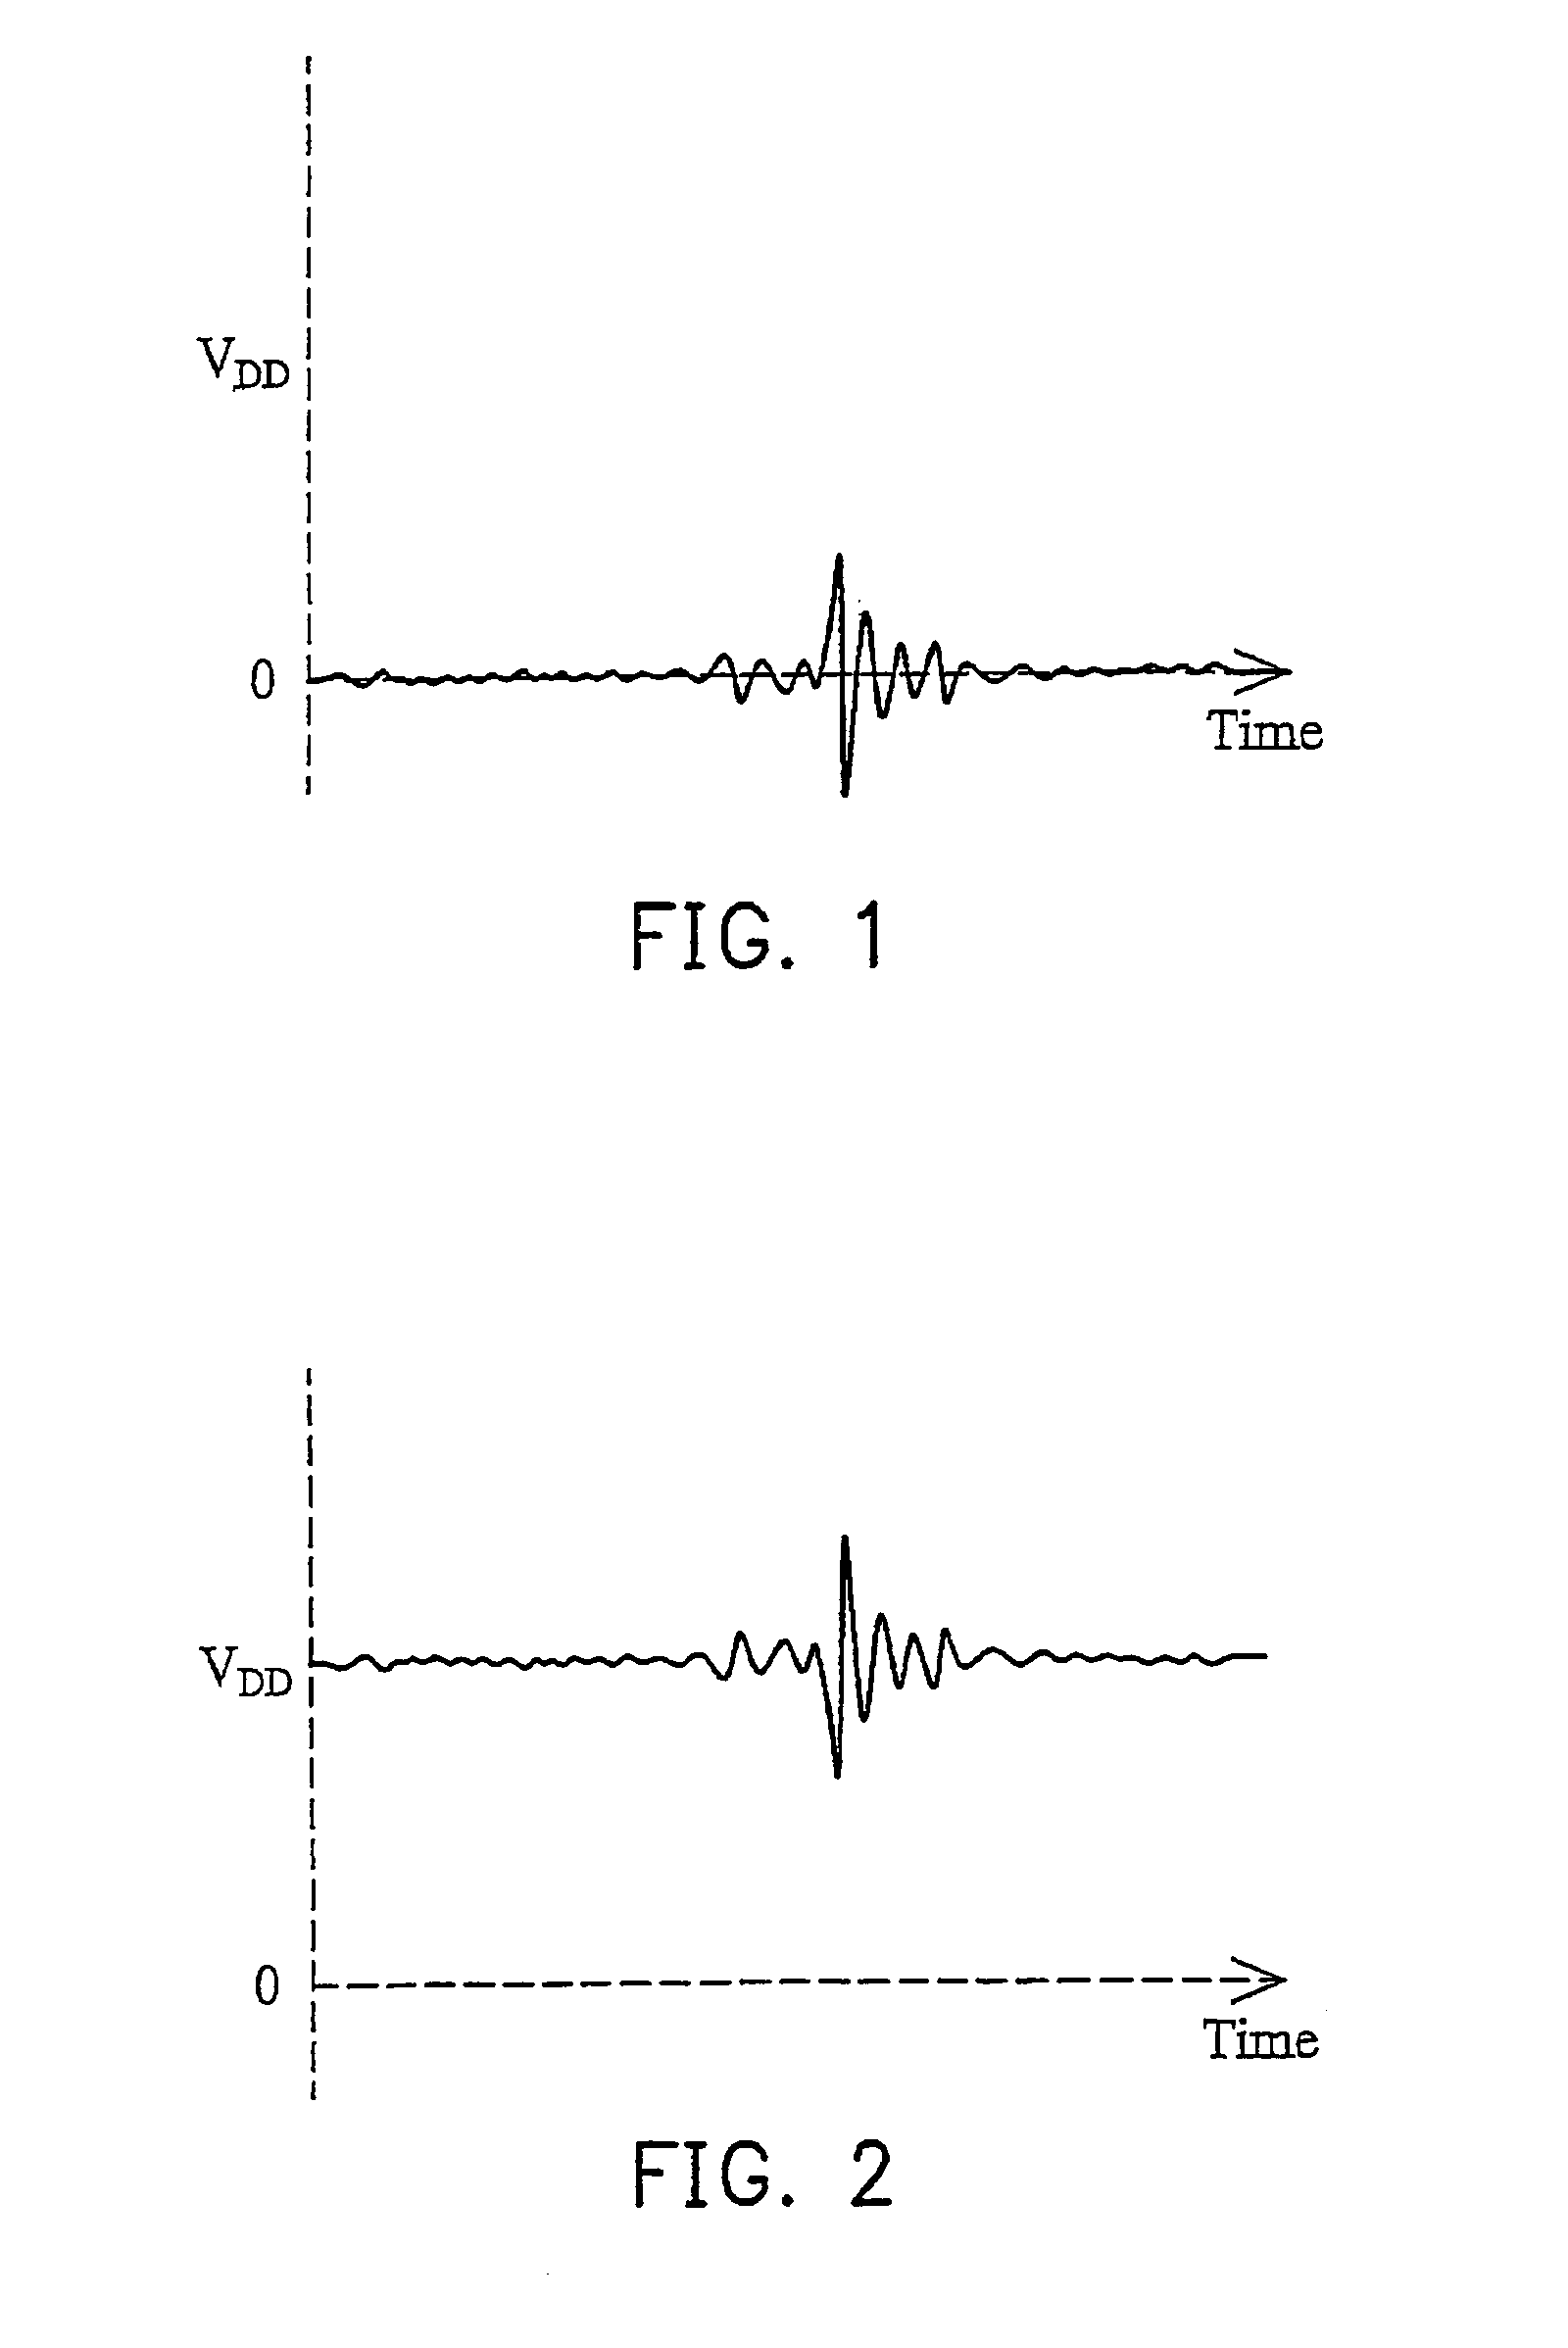 Signal testing of integrated circuit chips